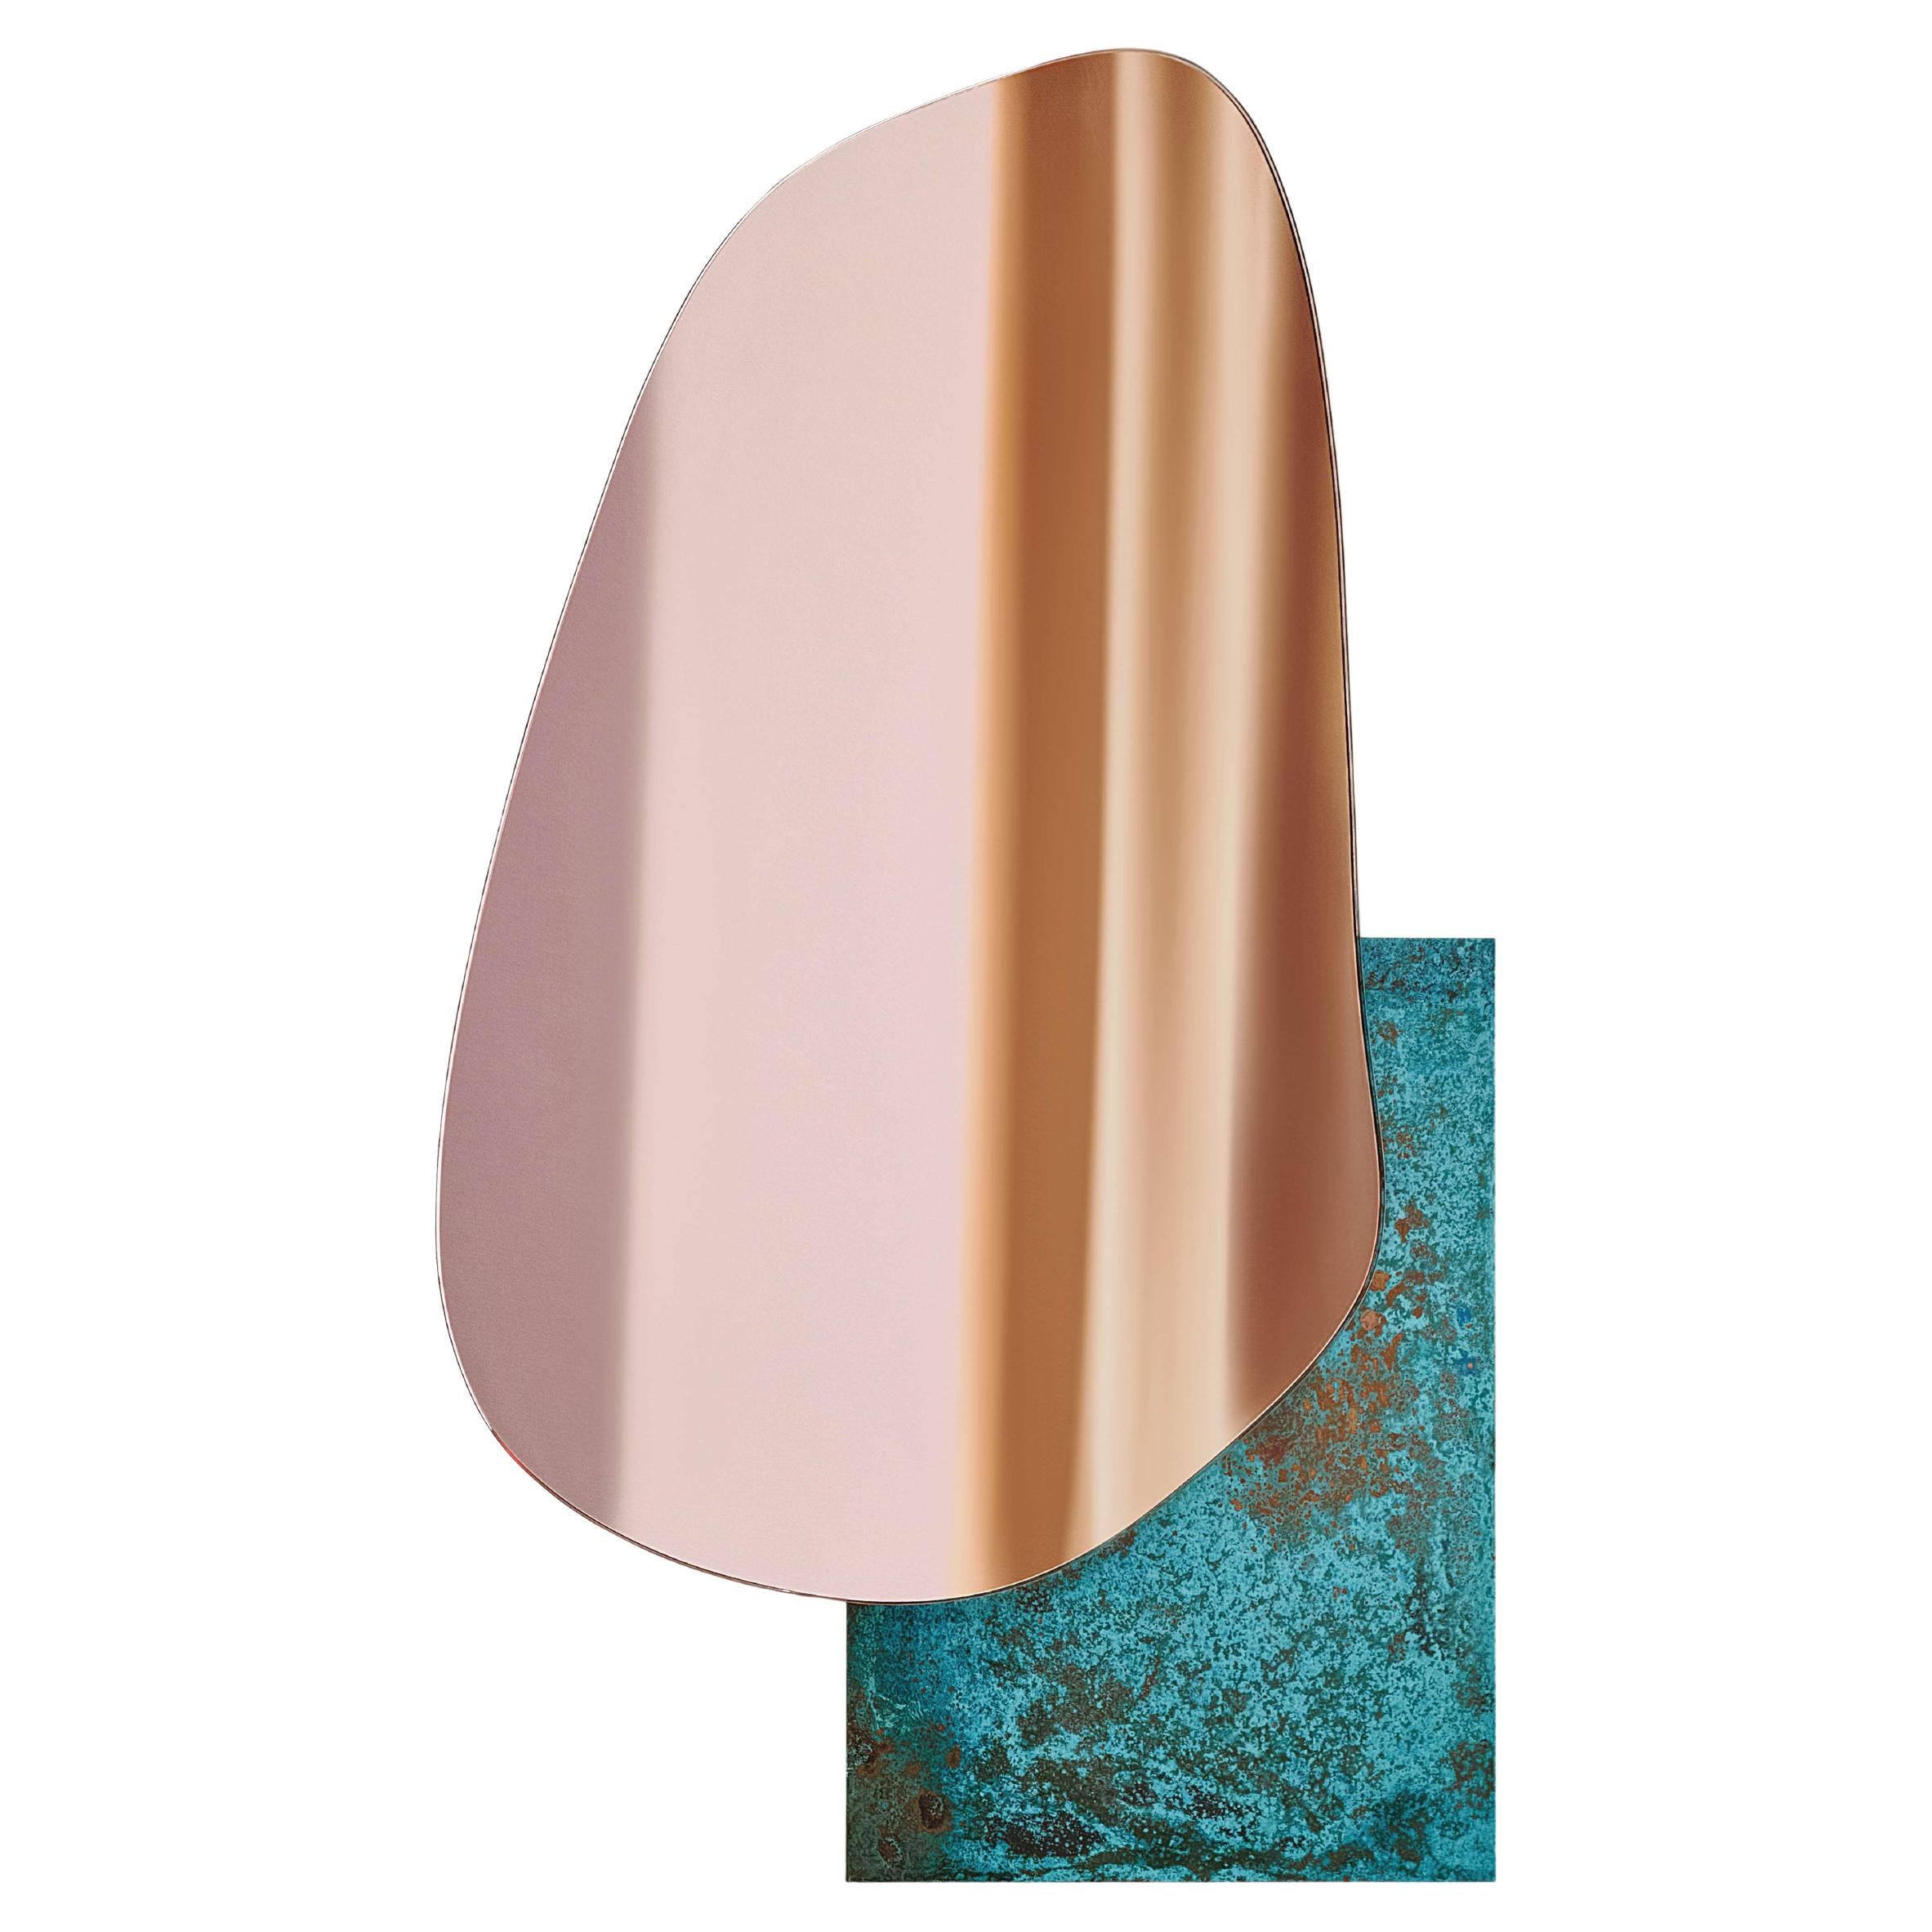 Modern Wall Mirror Lake 3 by Noom with Oxidized copper Base